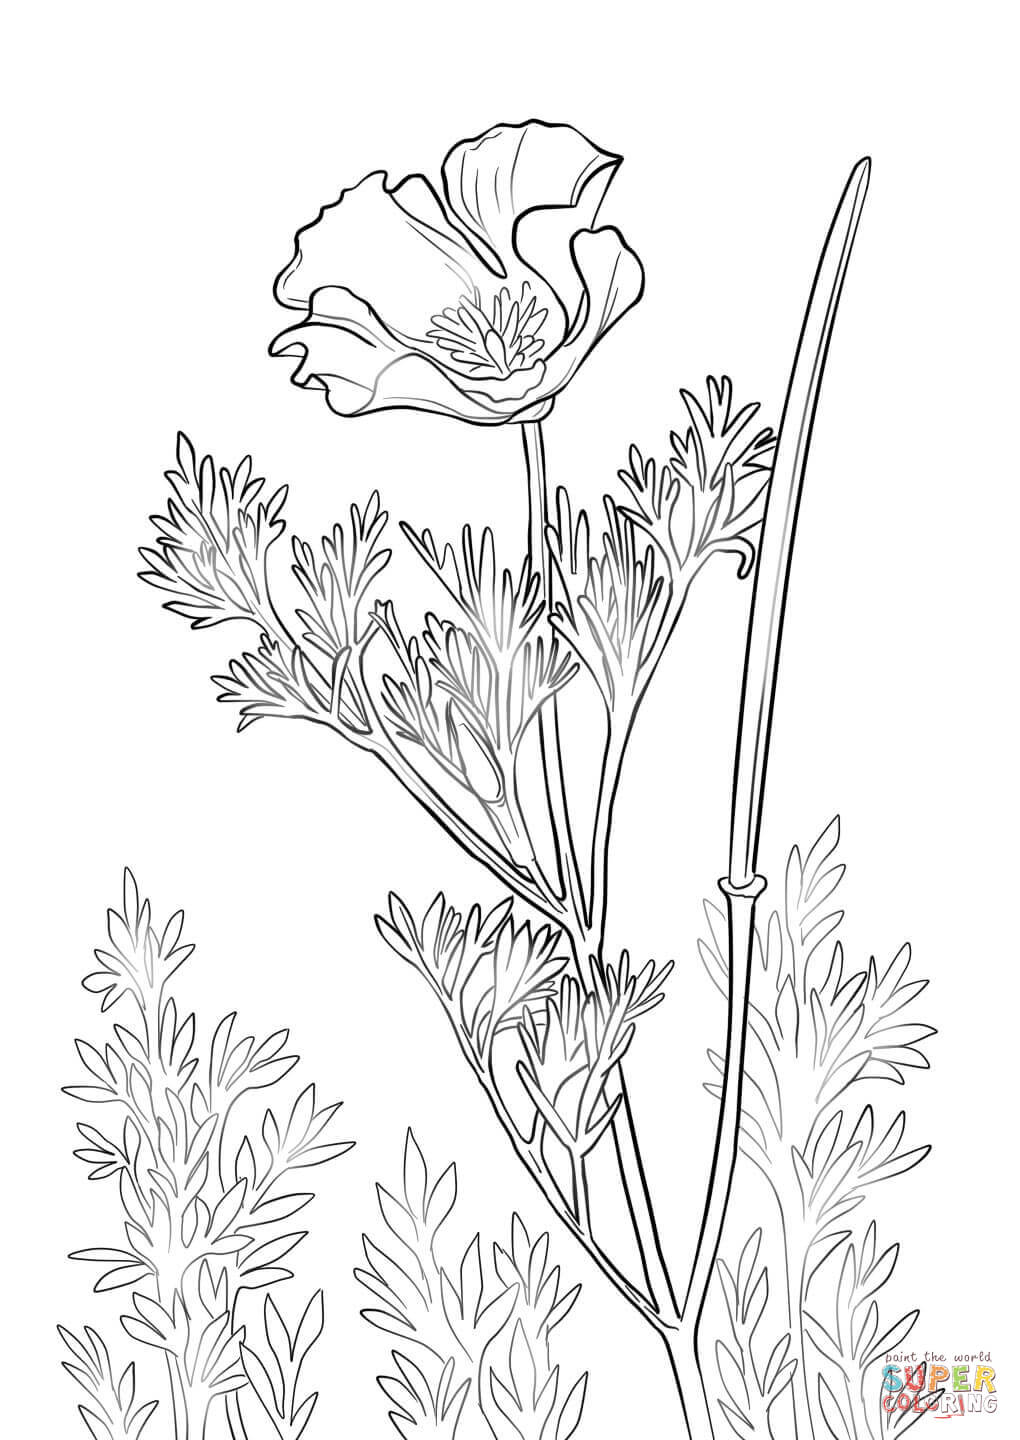 California Poppy coloring page | Free Printable Coloring Pages